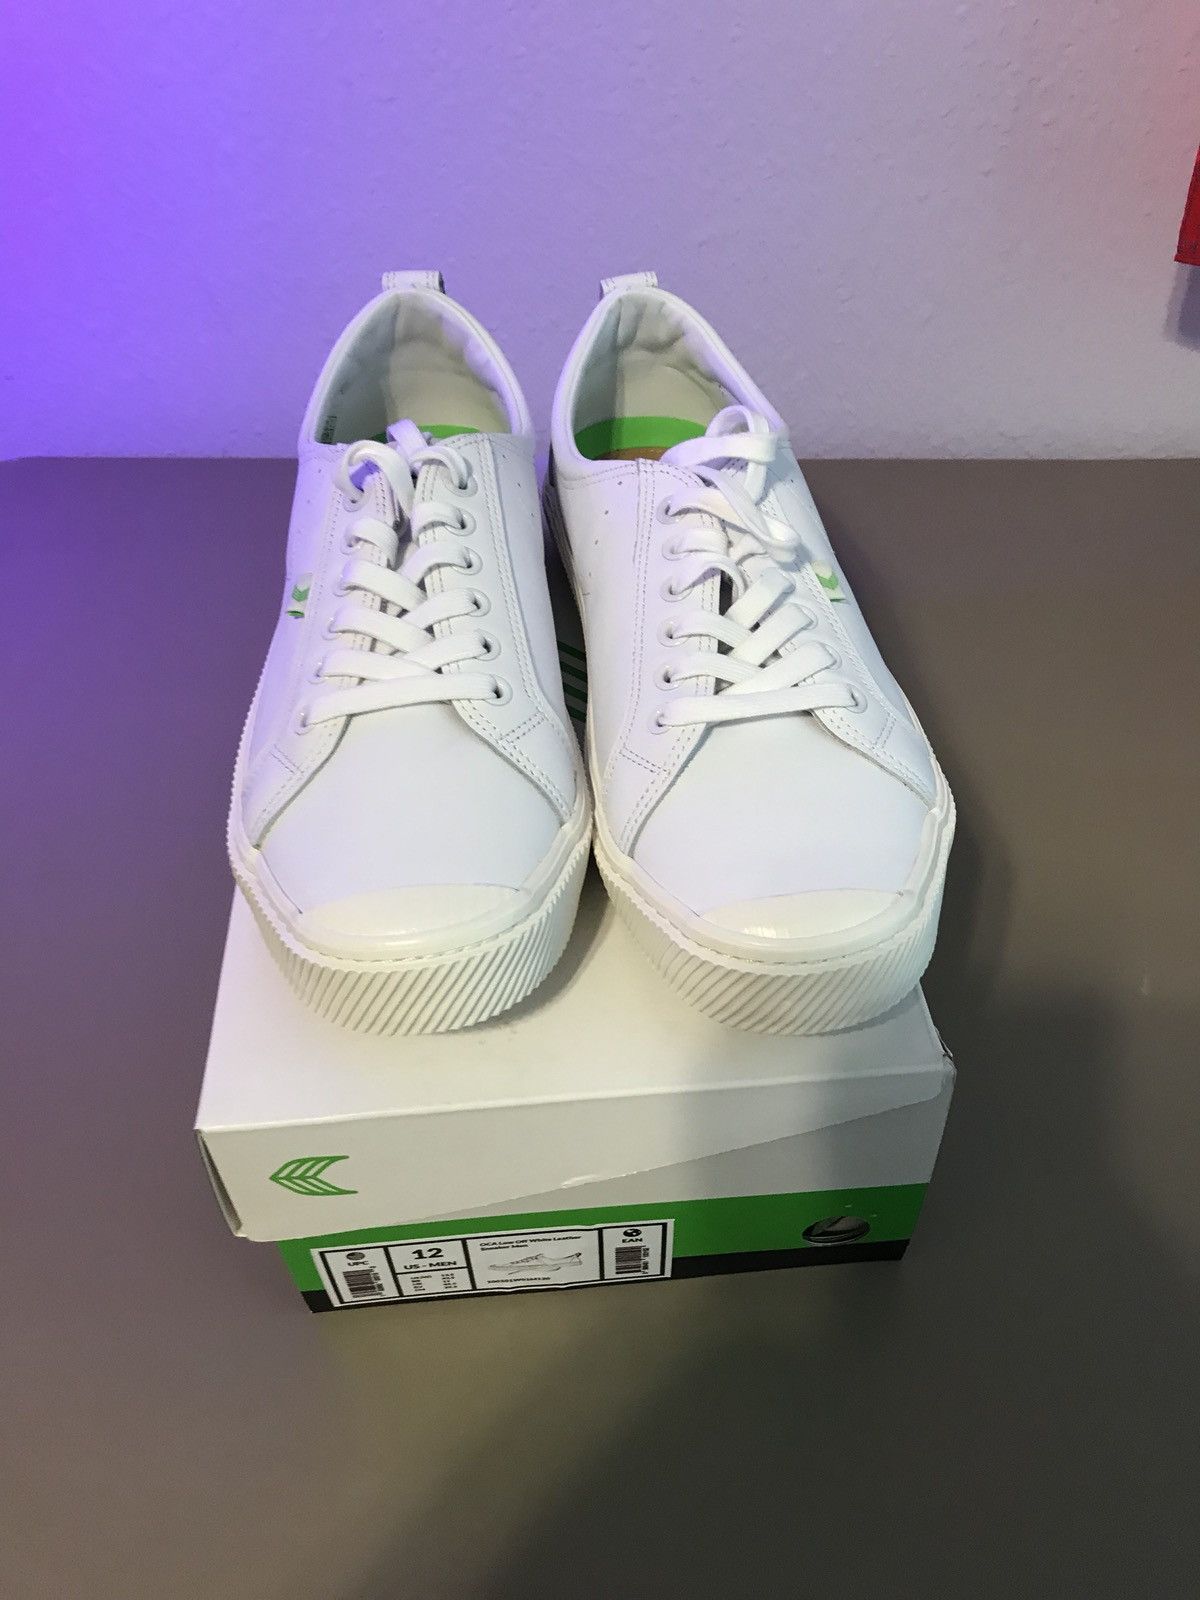 Other CARIUMA SNEAKERS Size US 12 / EU 45 - 2 Preview